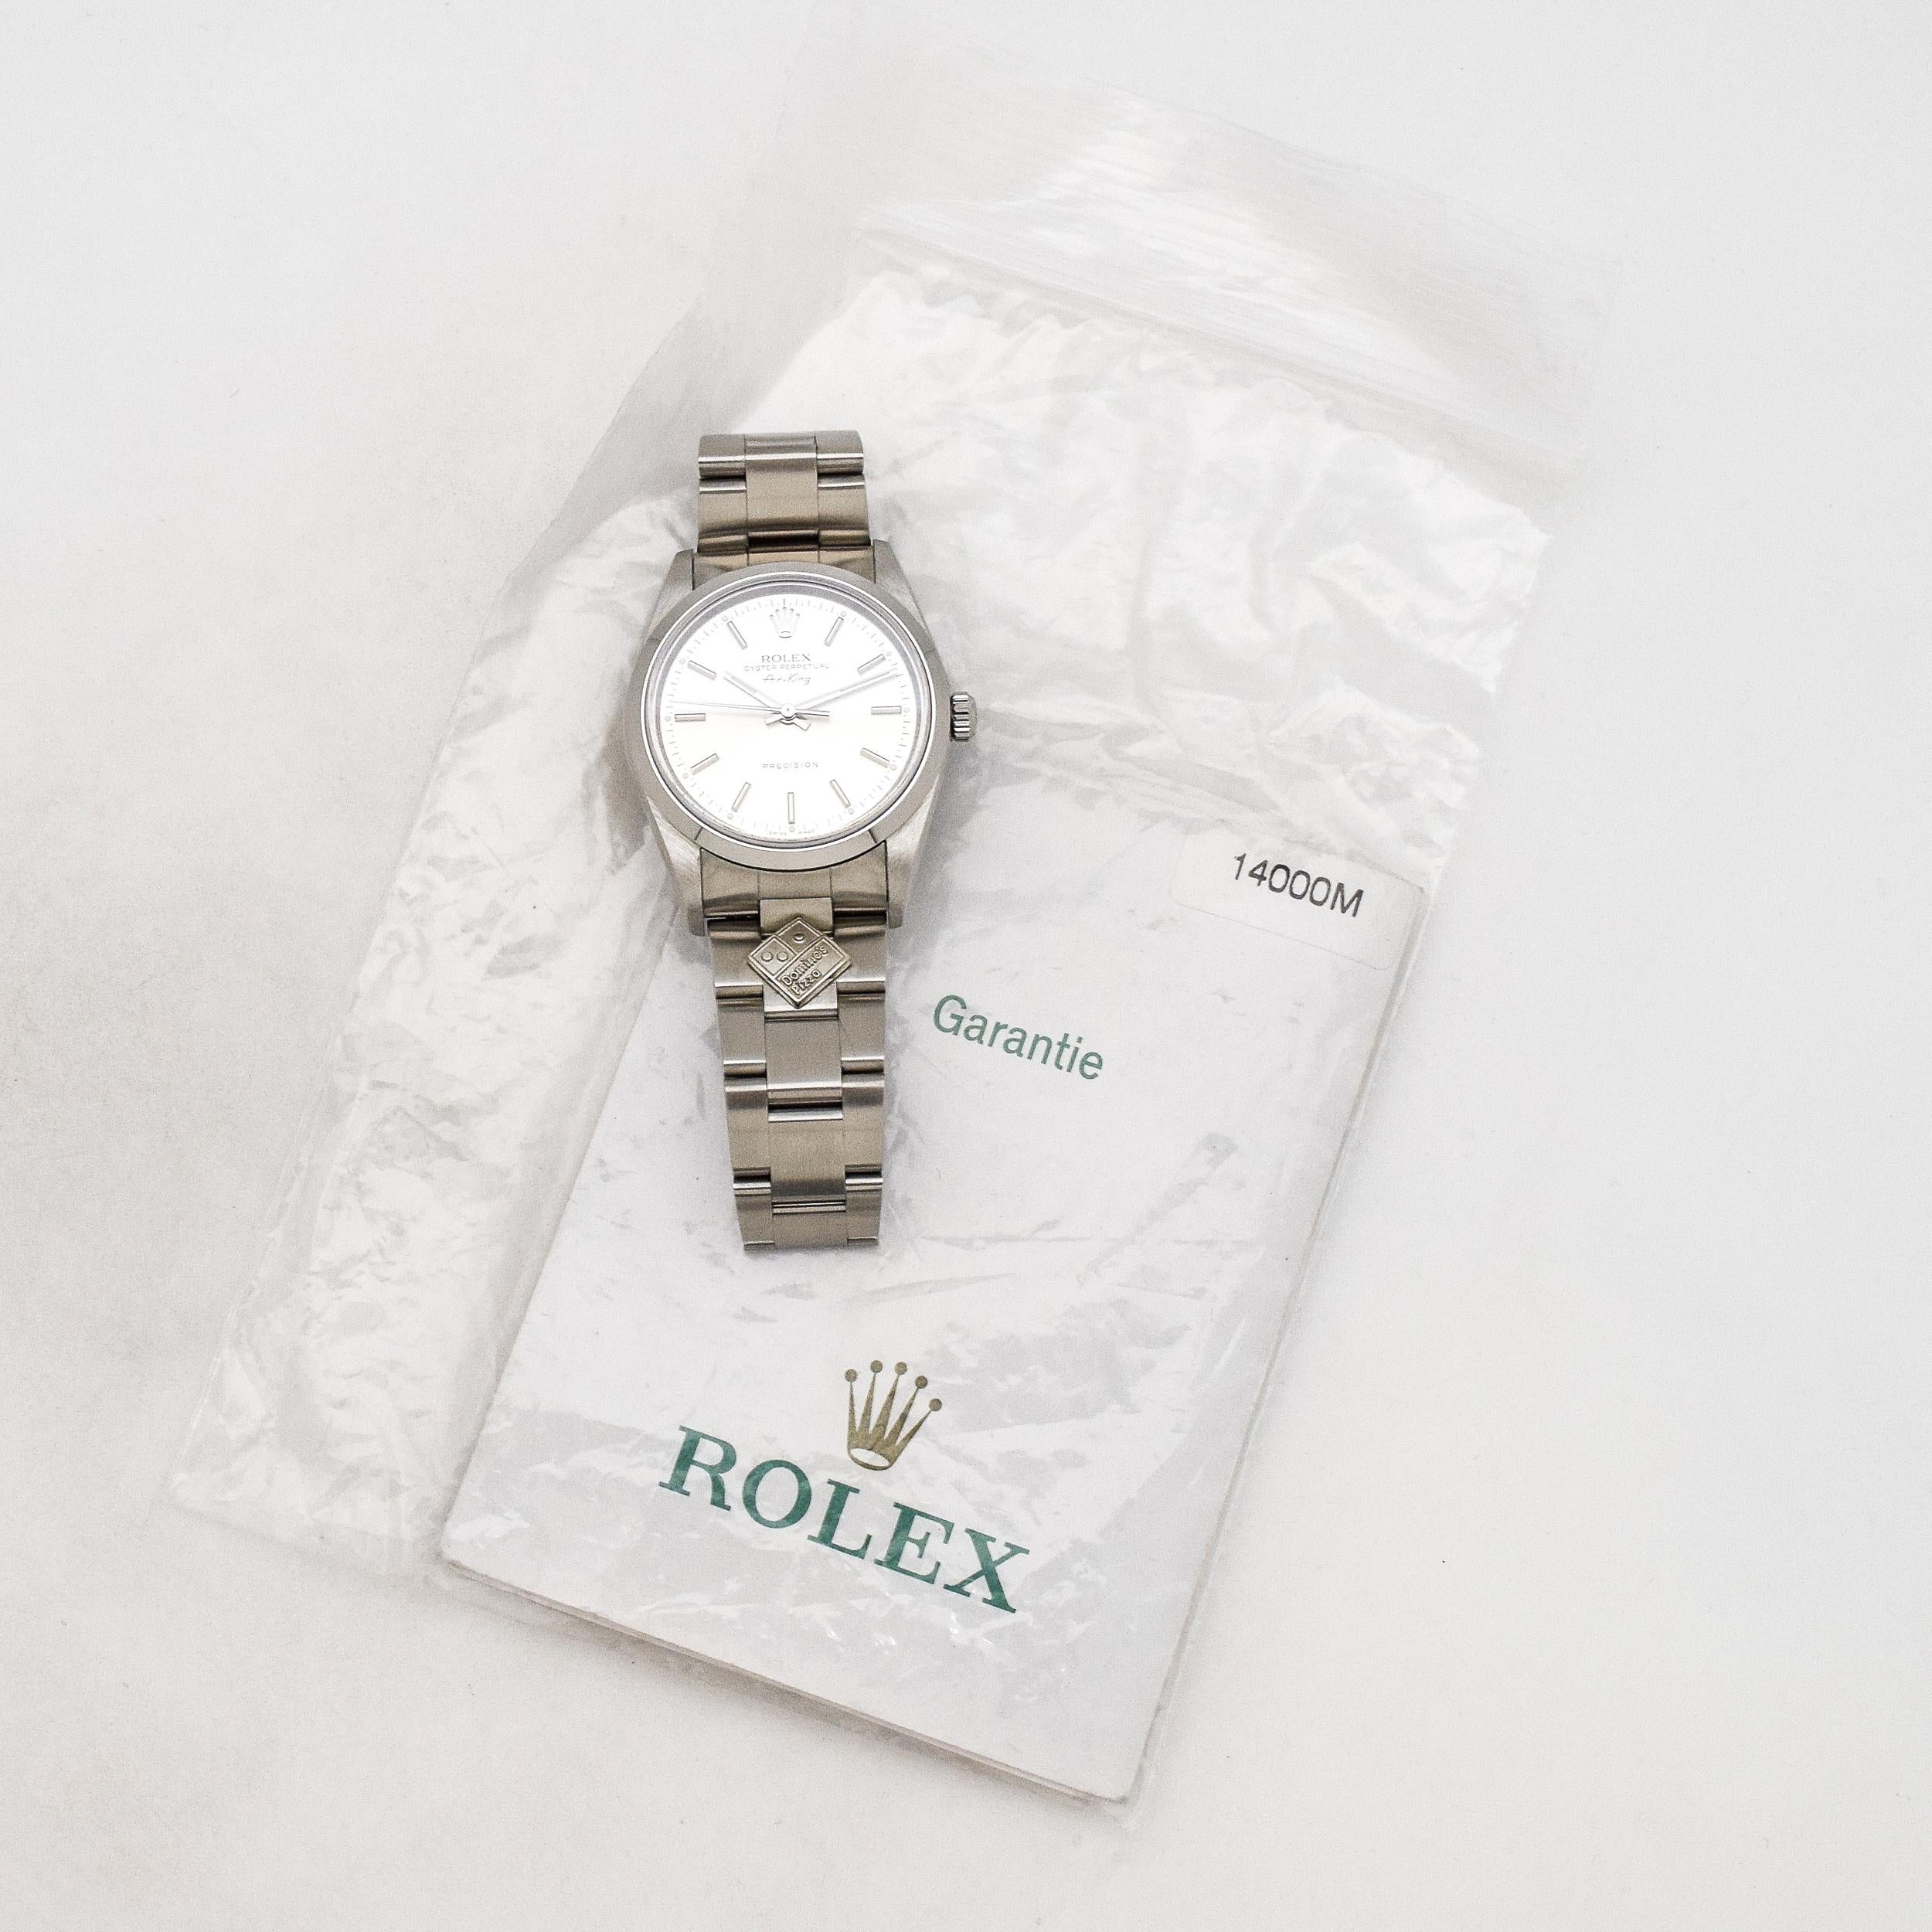 Rolex Air King Ref. 14000-M Domino's Watch Stainless Steel, 2006 2